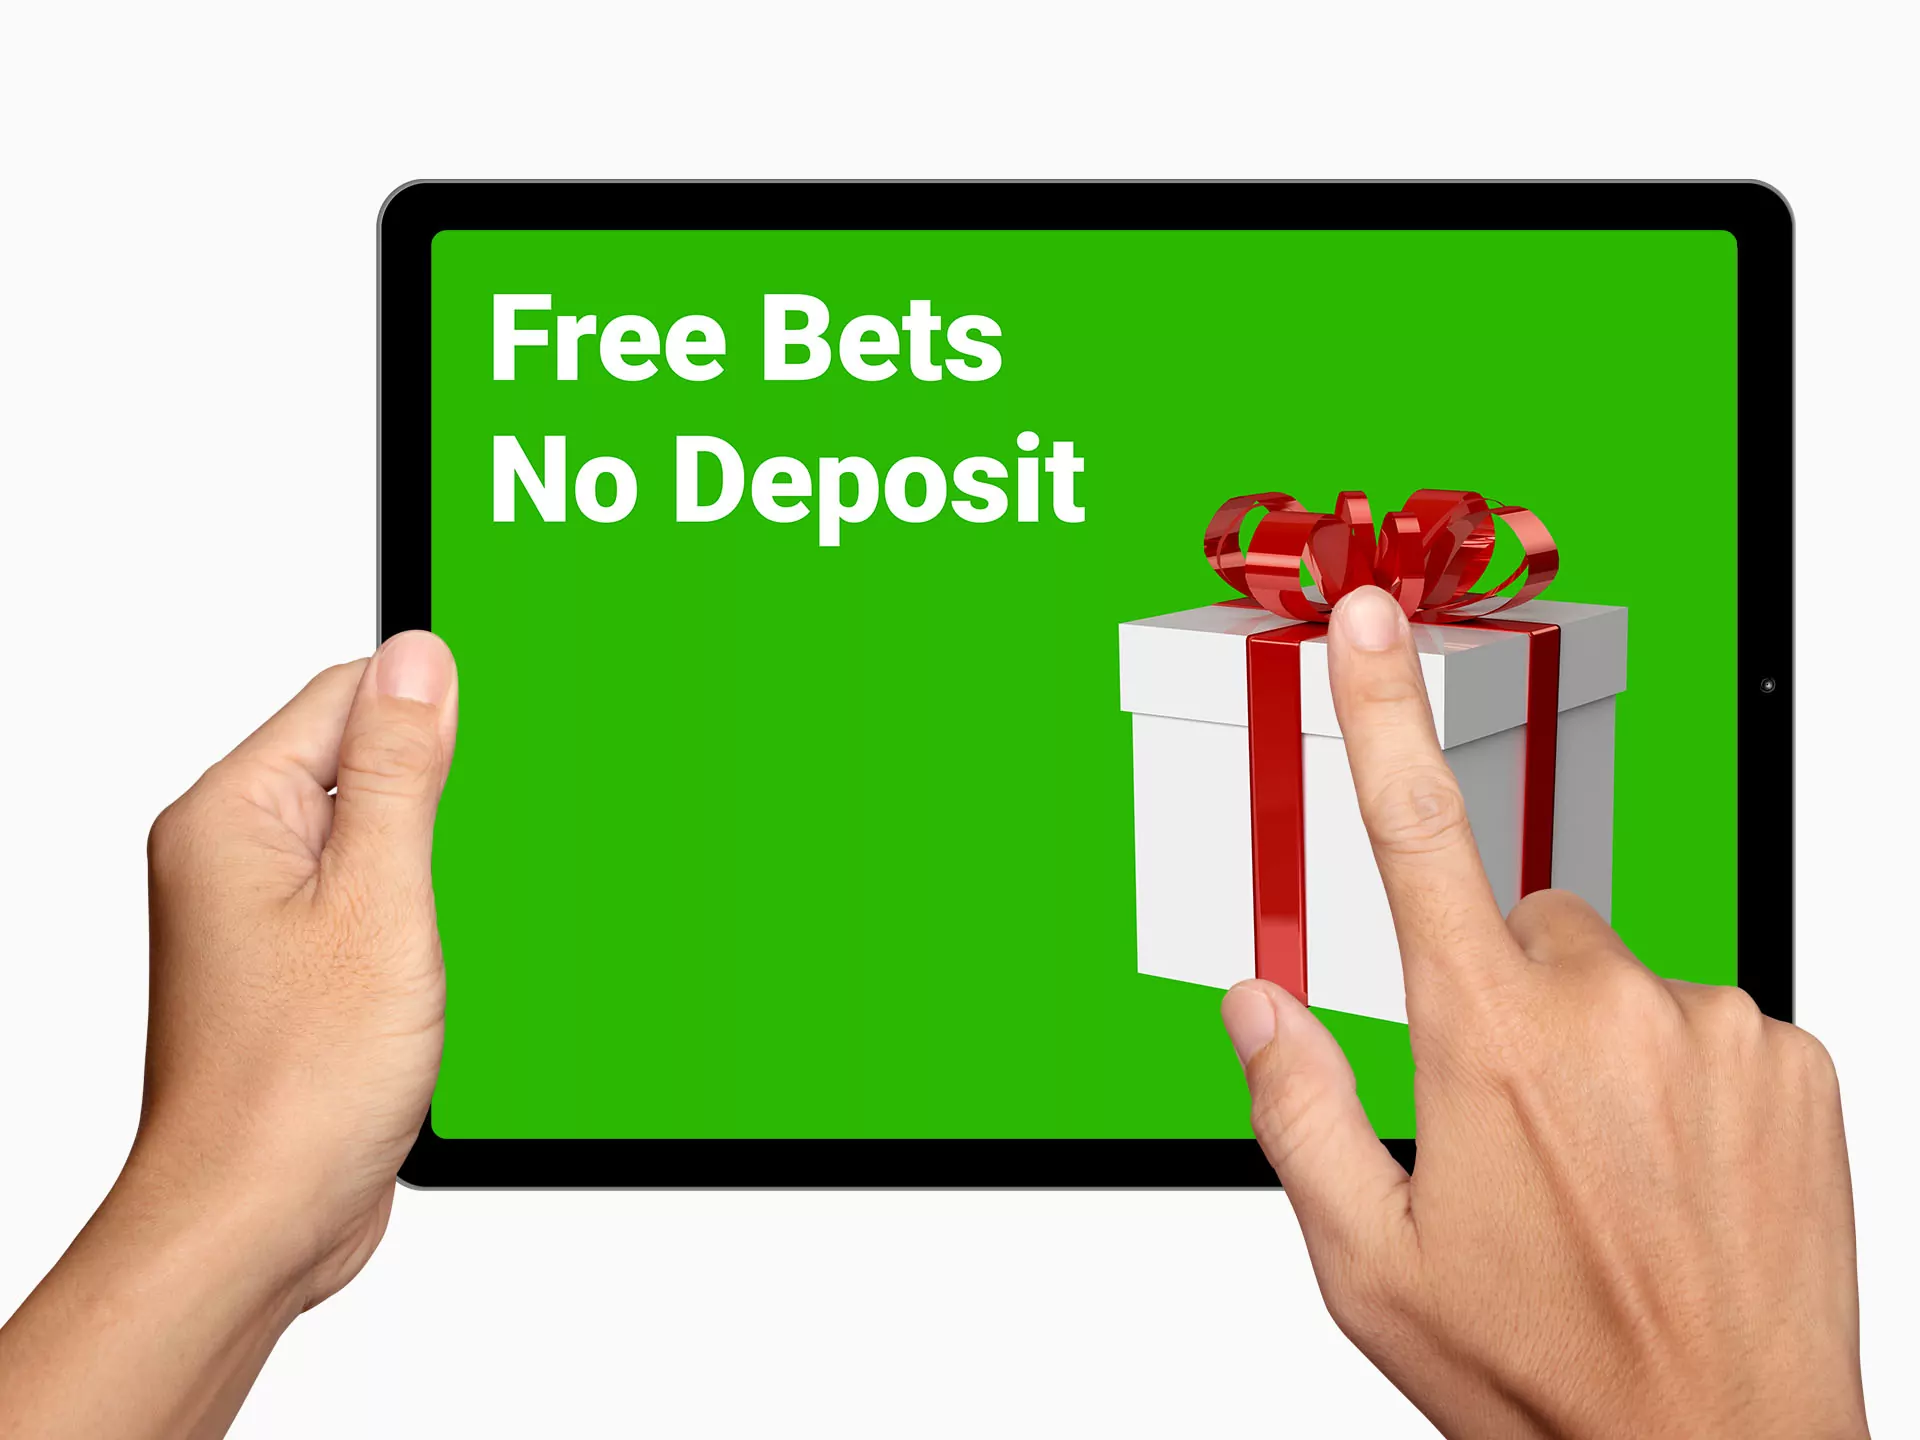 You can get free bets after registration.